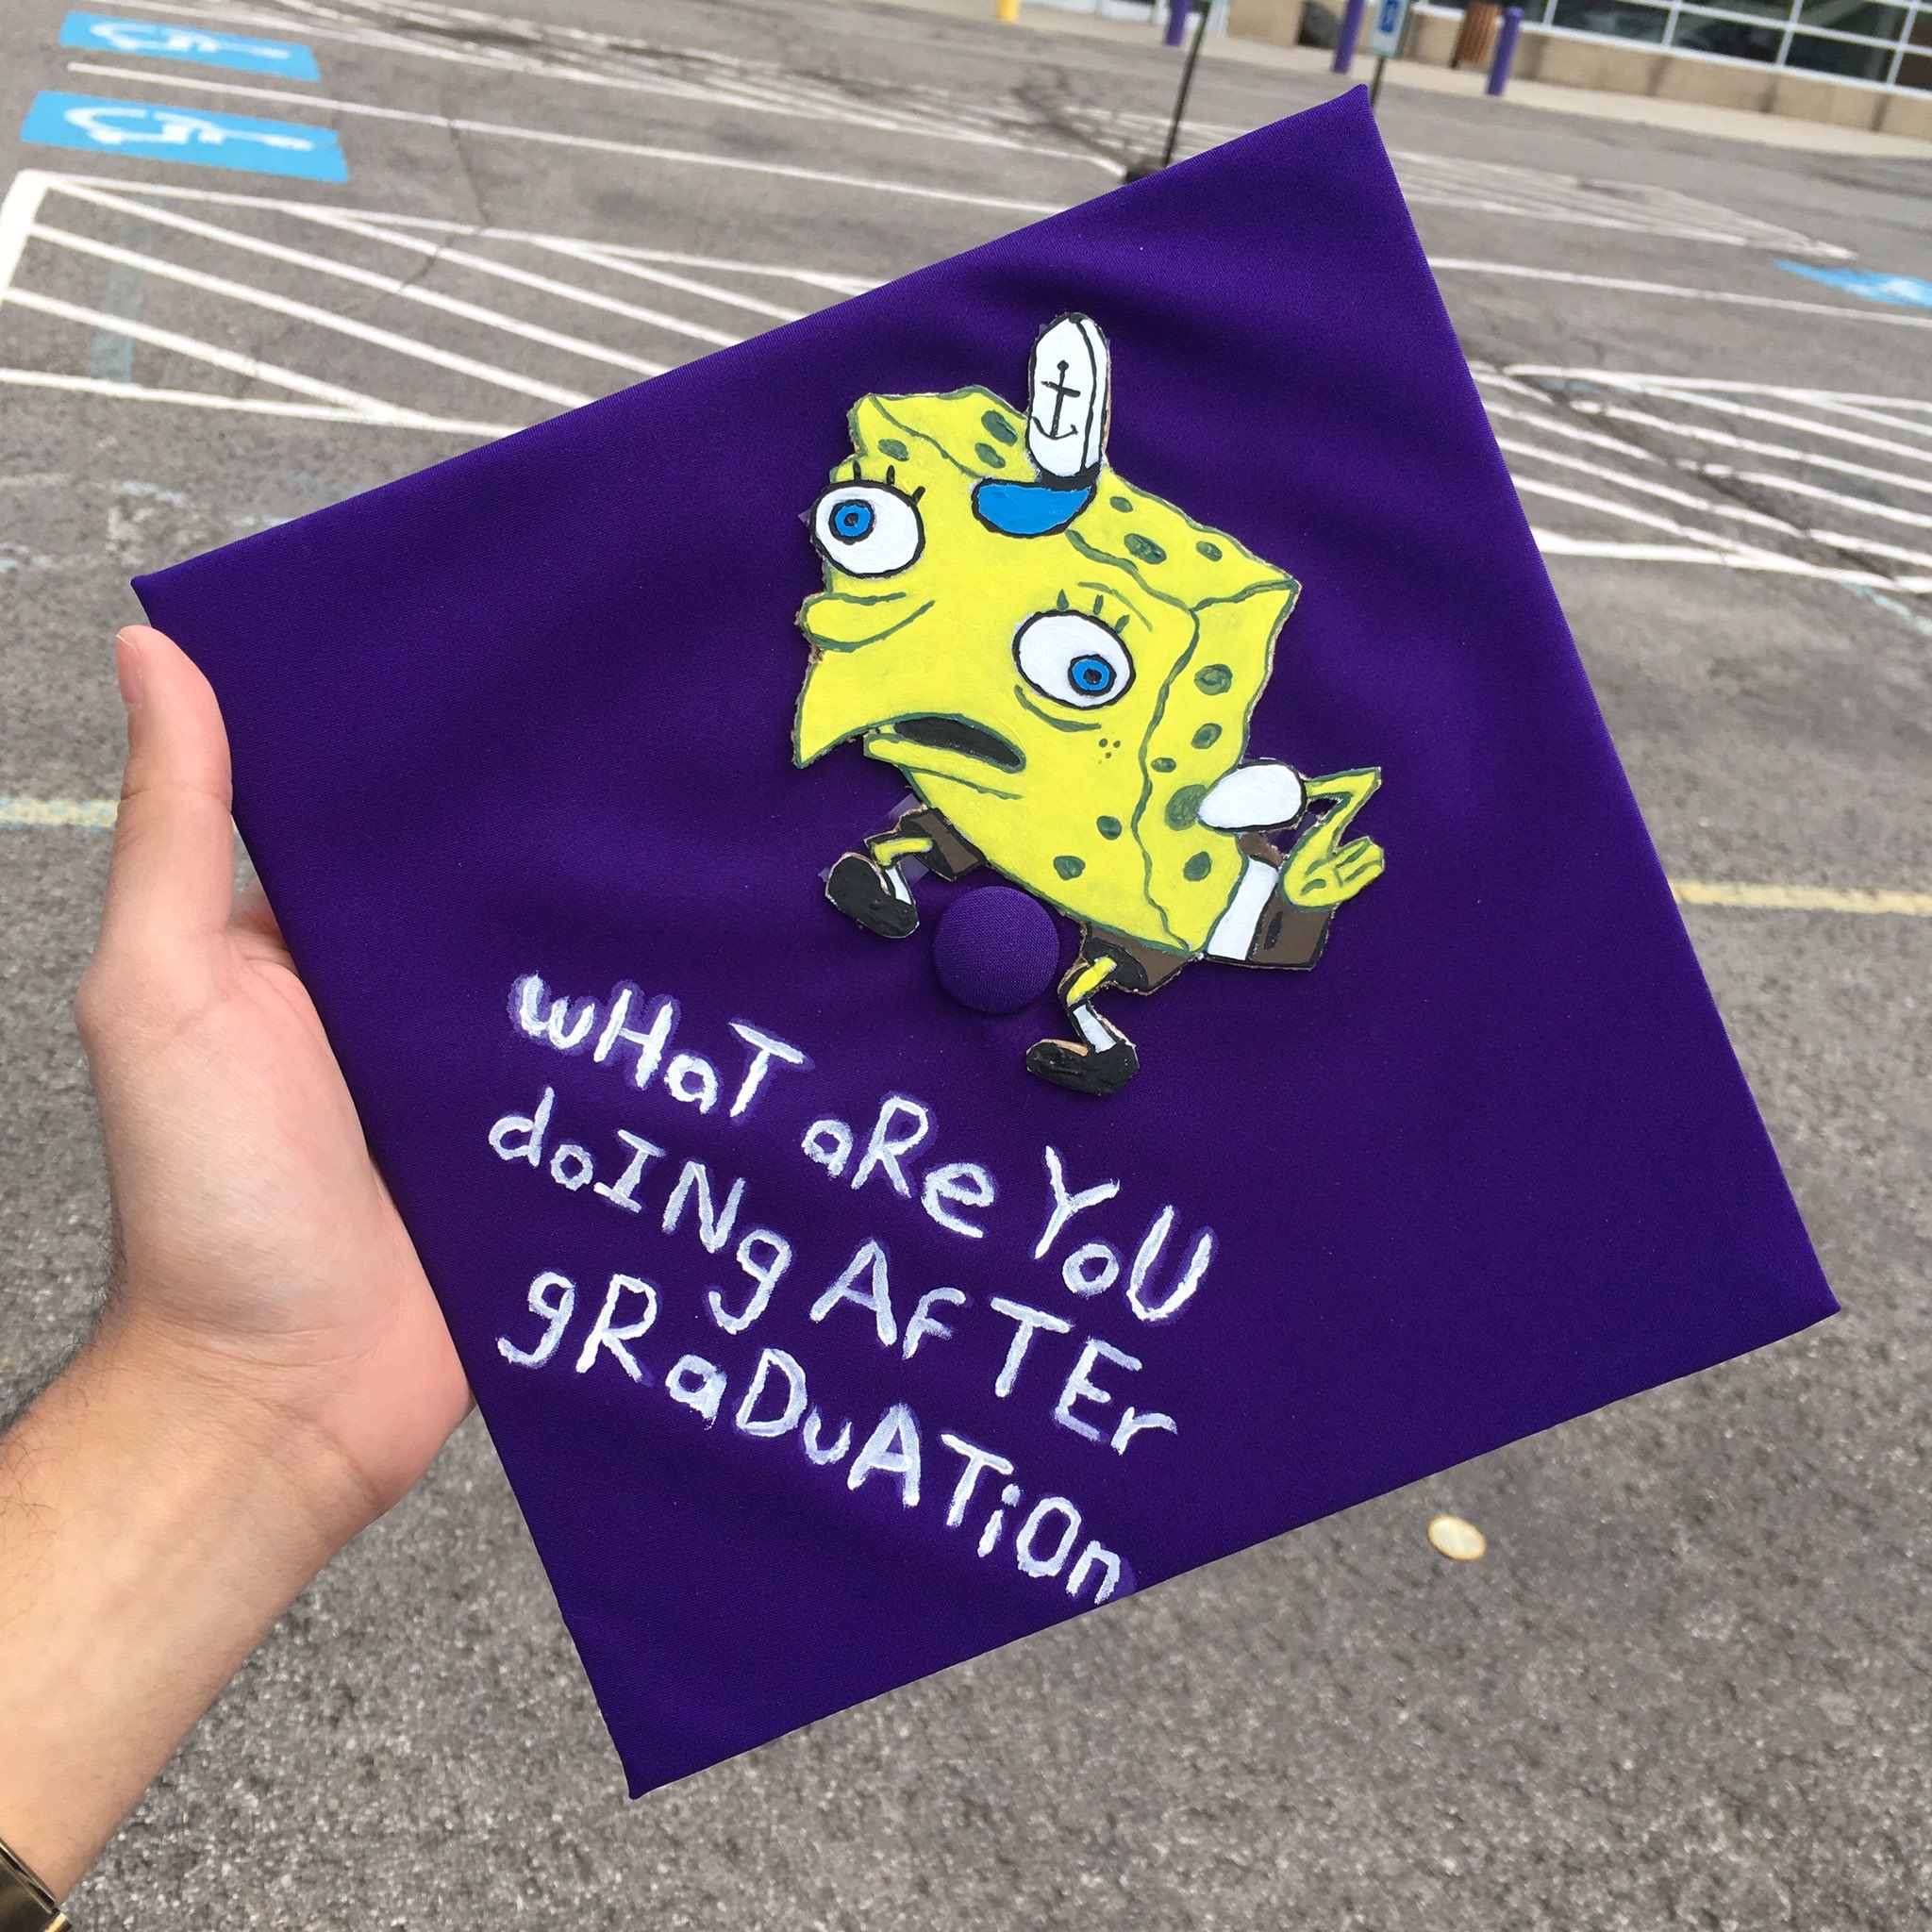 Graduation Cap with a picture of Spongebob Squarepants asking "what are you doing after graduation."